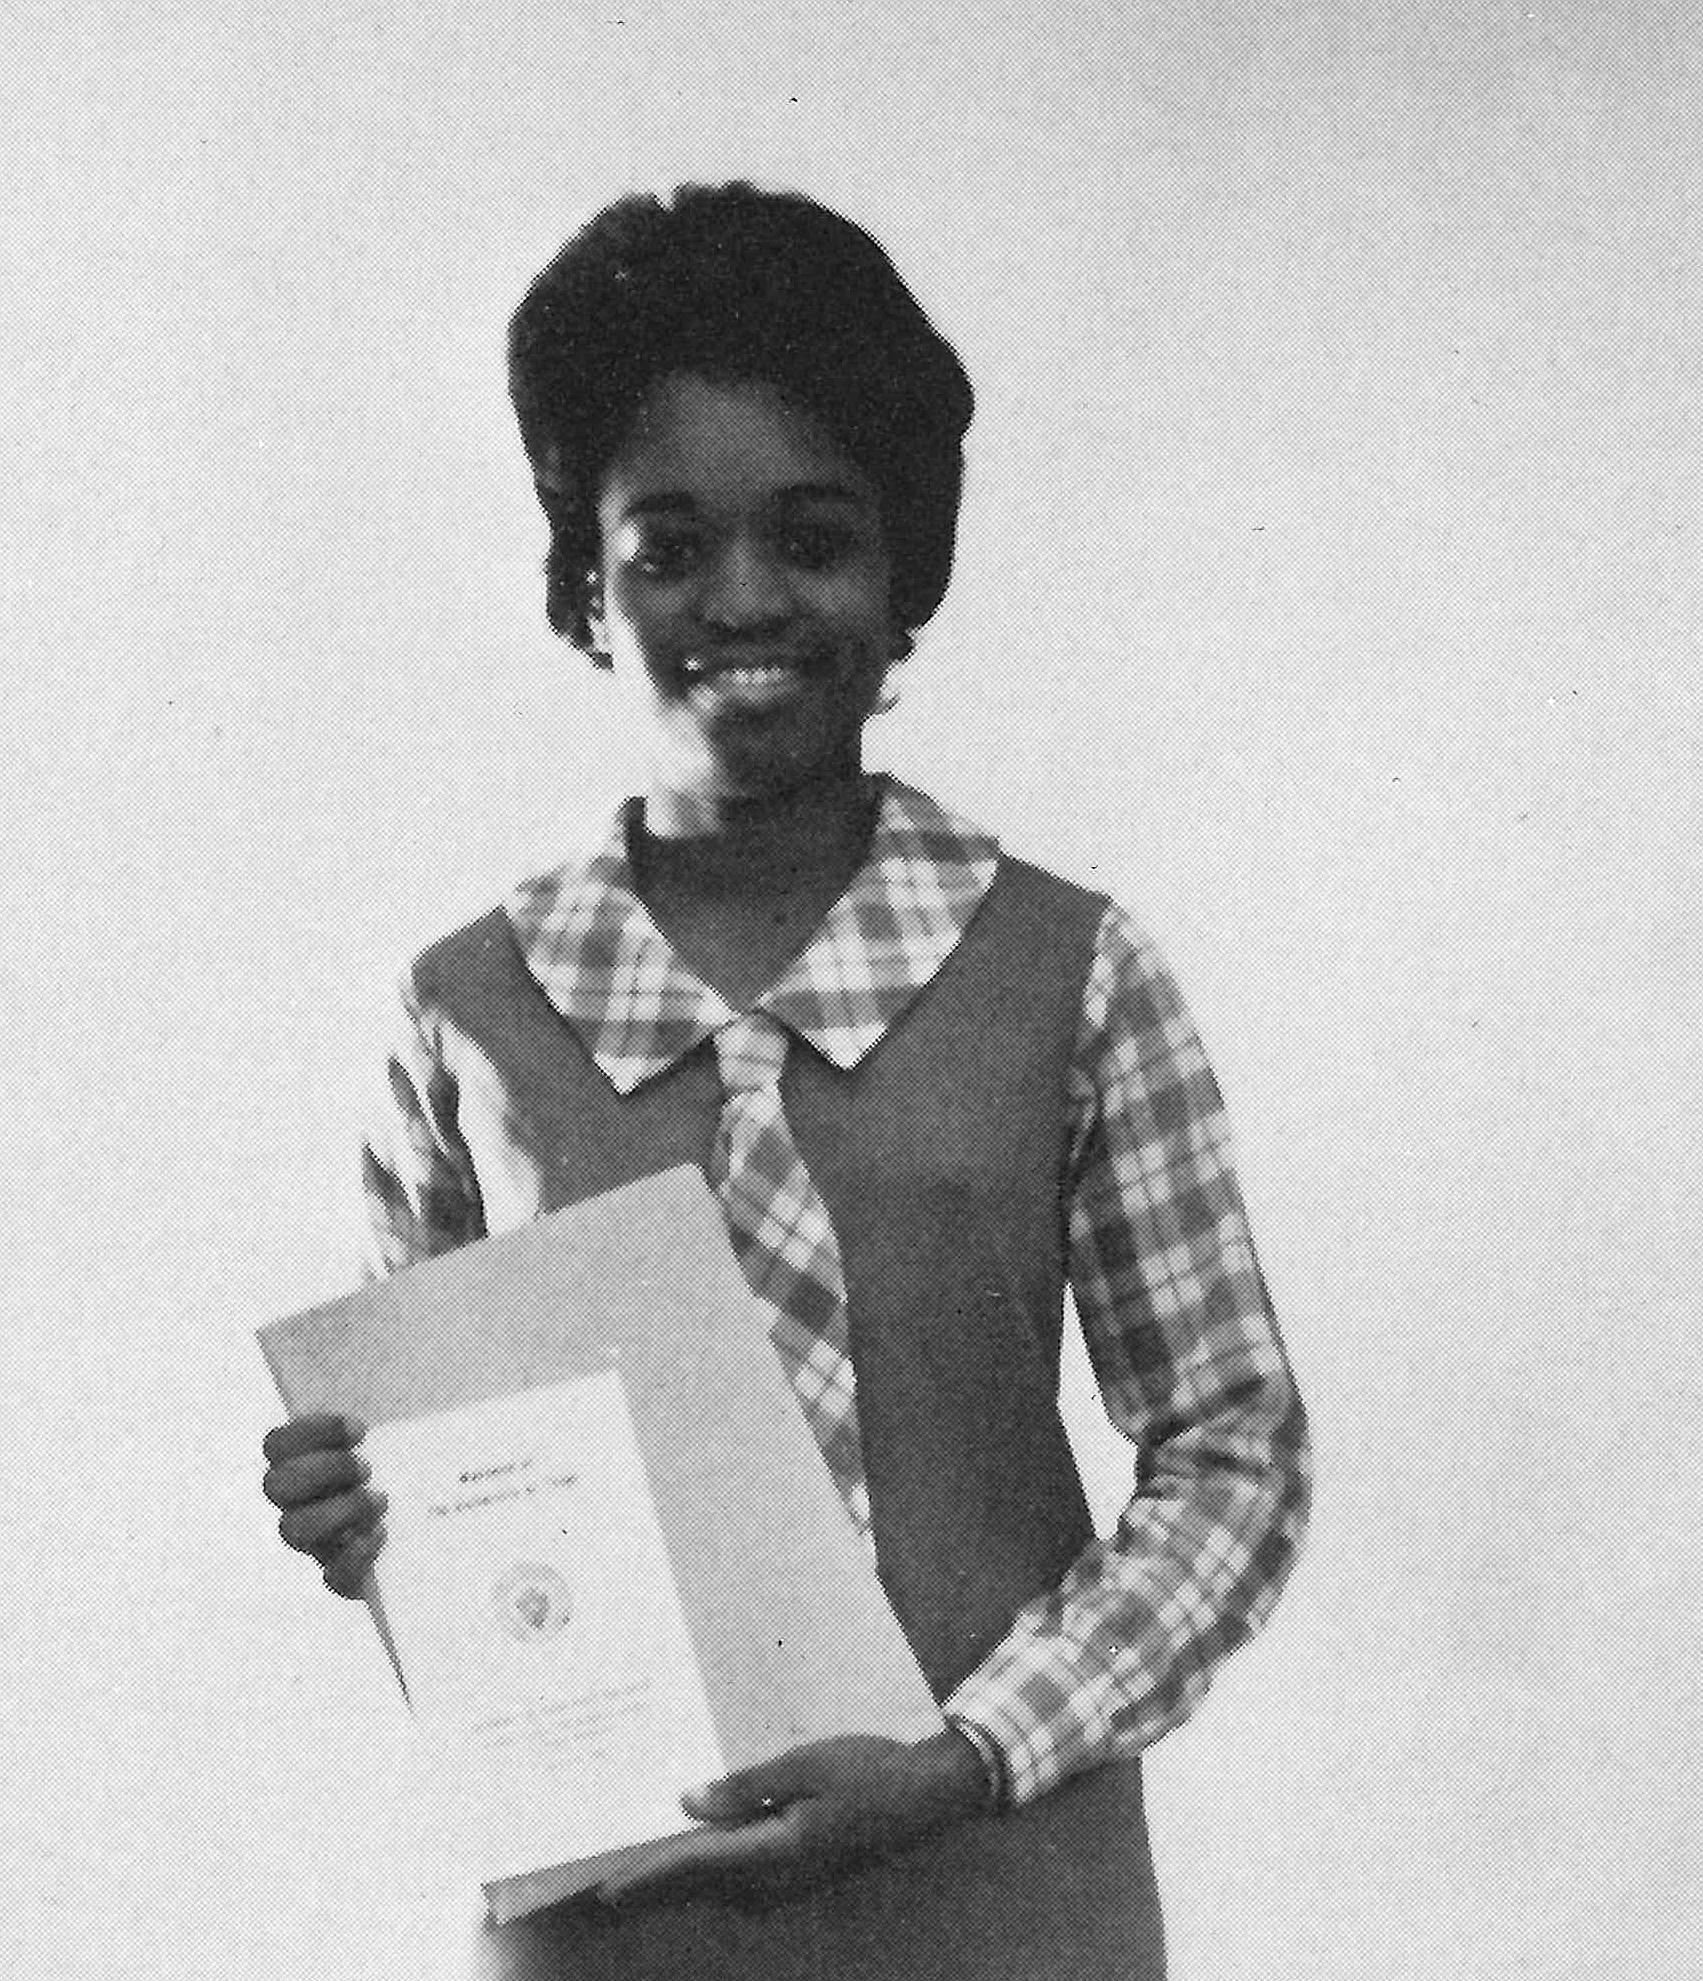 Anitha Mitchell in the Cactus Yearbook as an Oustanding Student of 1965